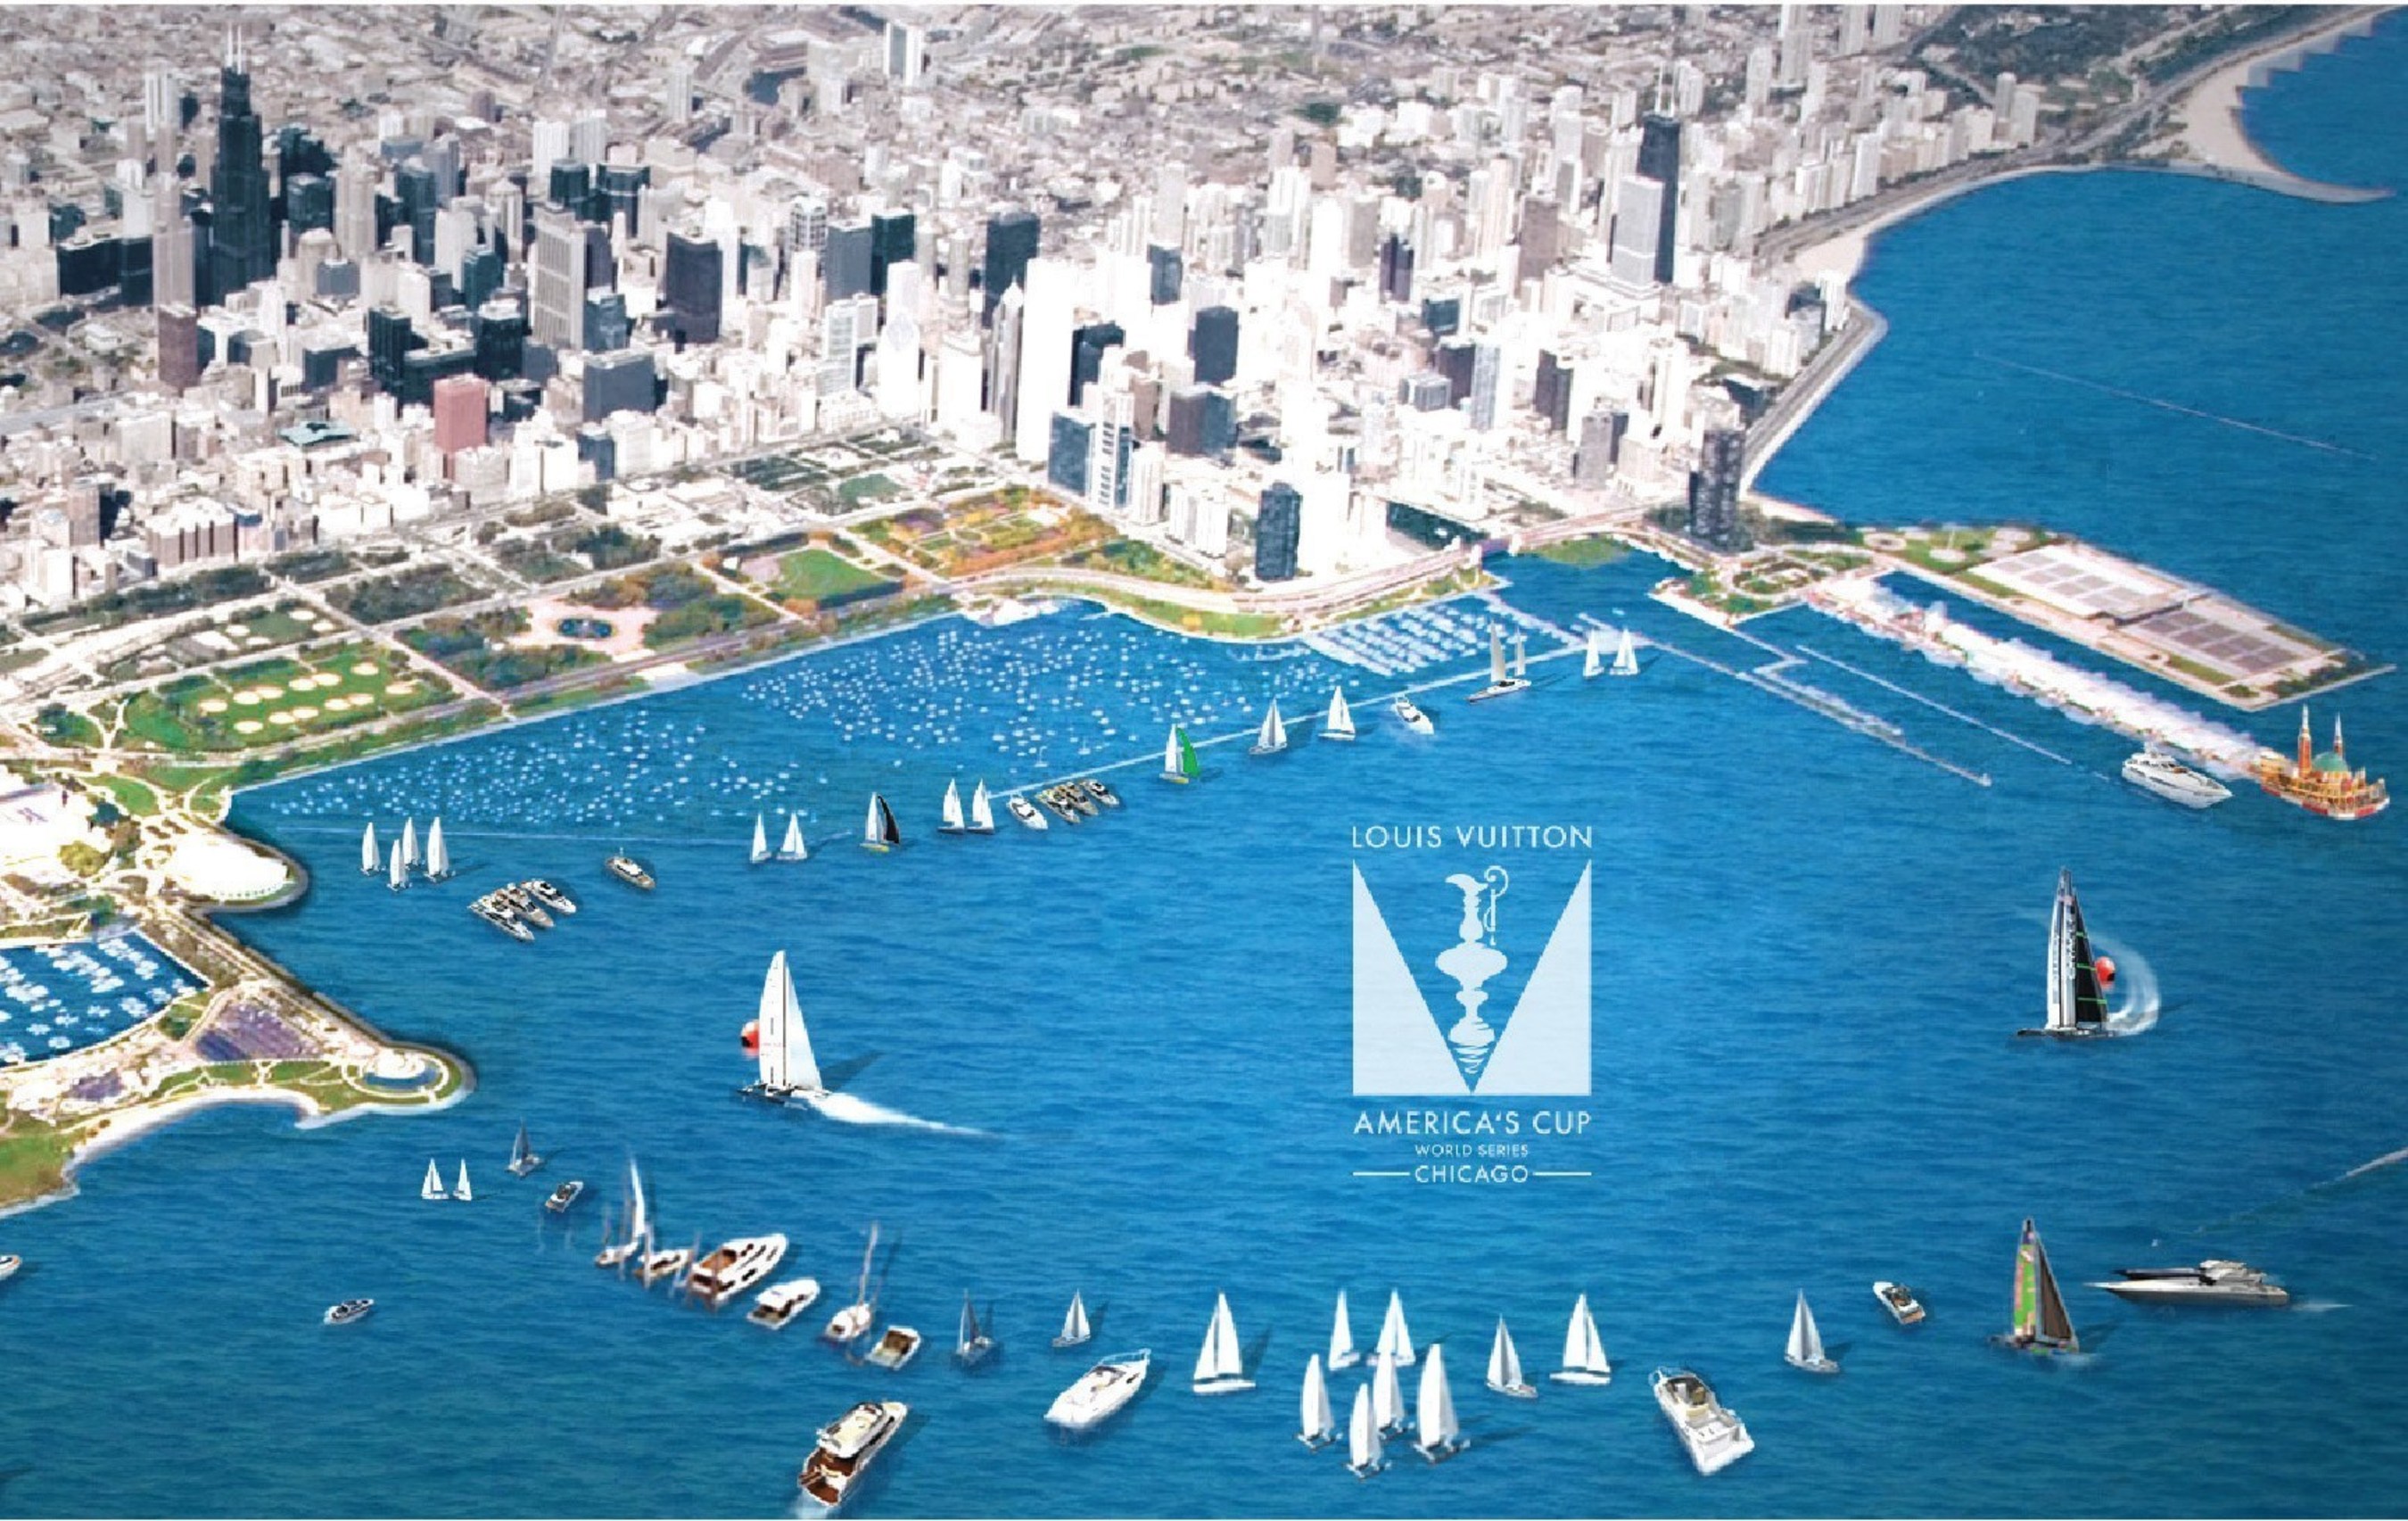 Chicago Chosen to Host the Louis Vuitton America's Cup World Series Sailing  Event June 10-12, 2016